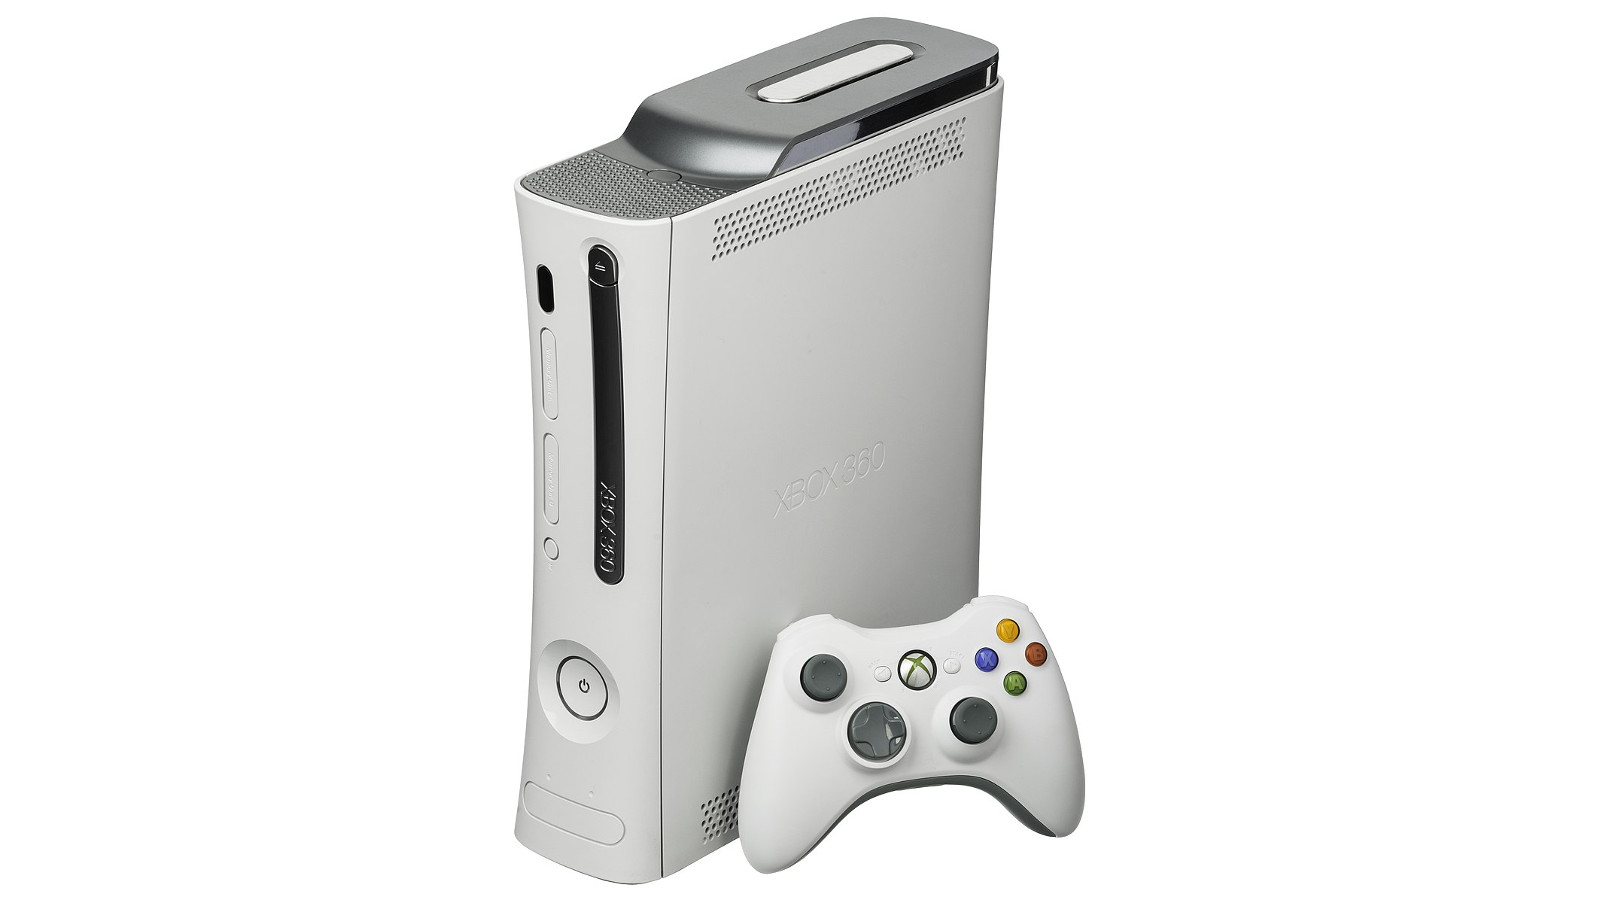 The best Xbox 360 emulators for PC